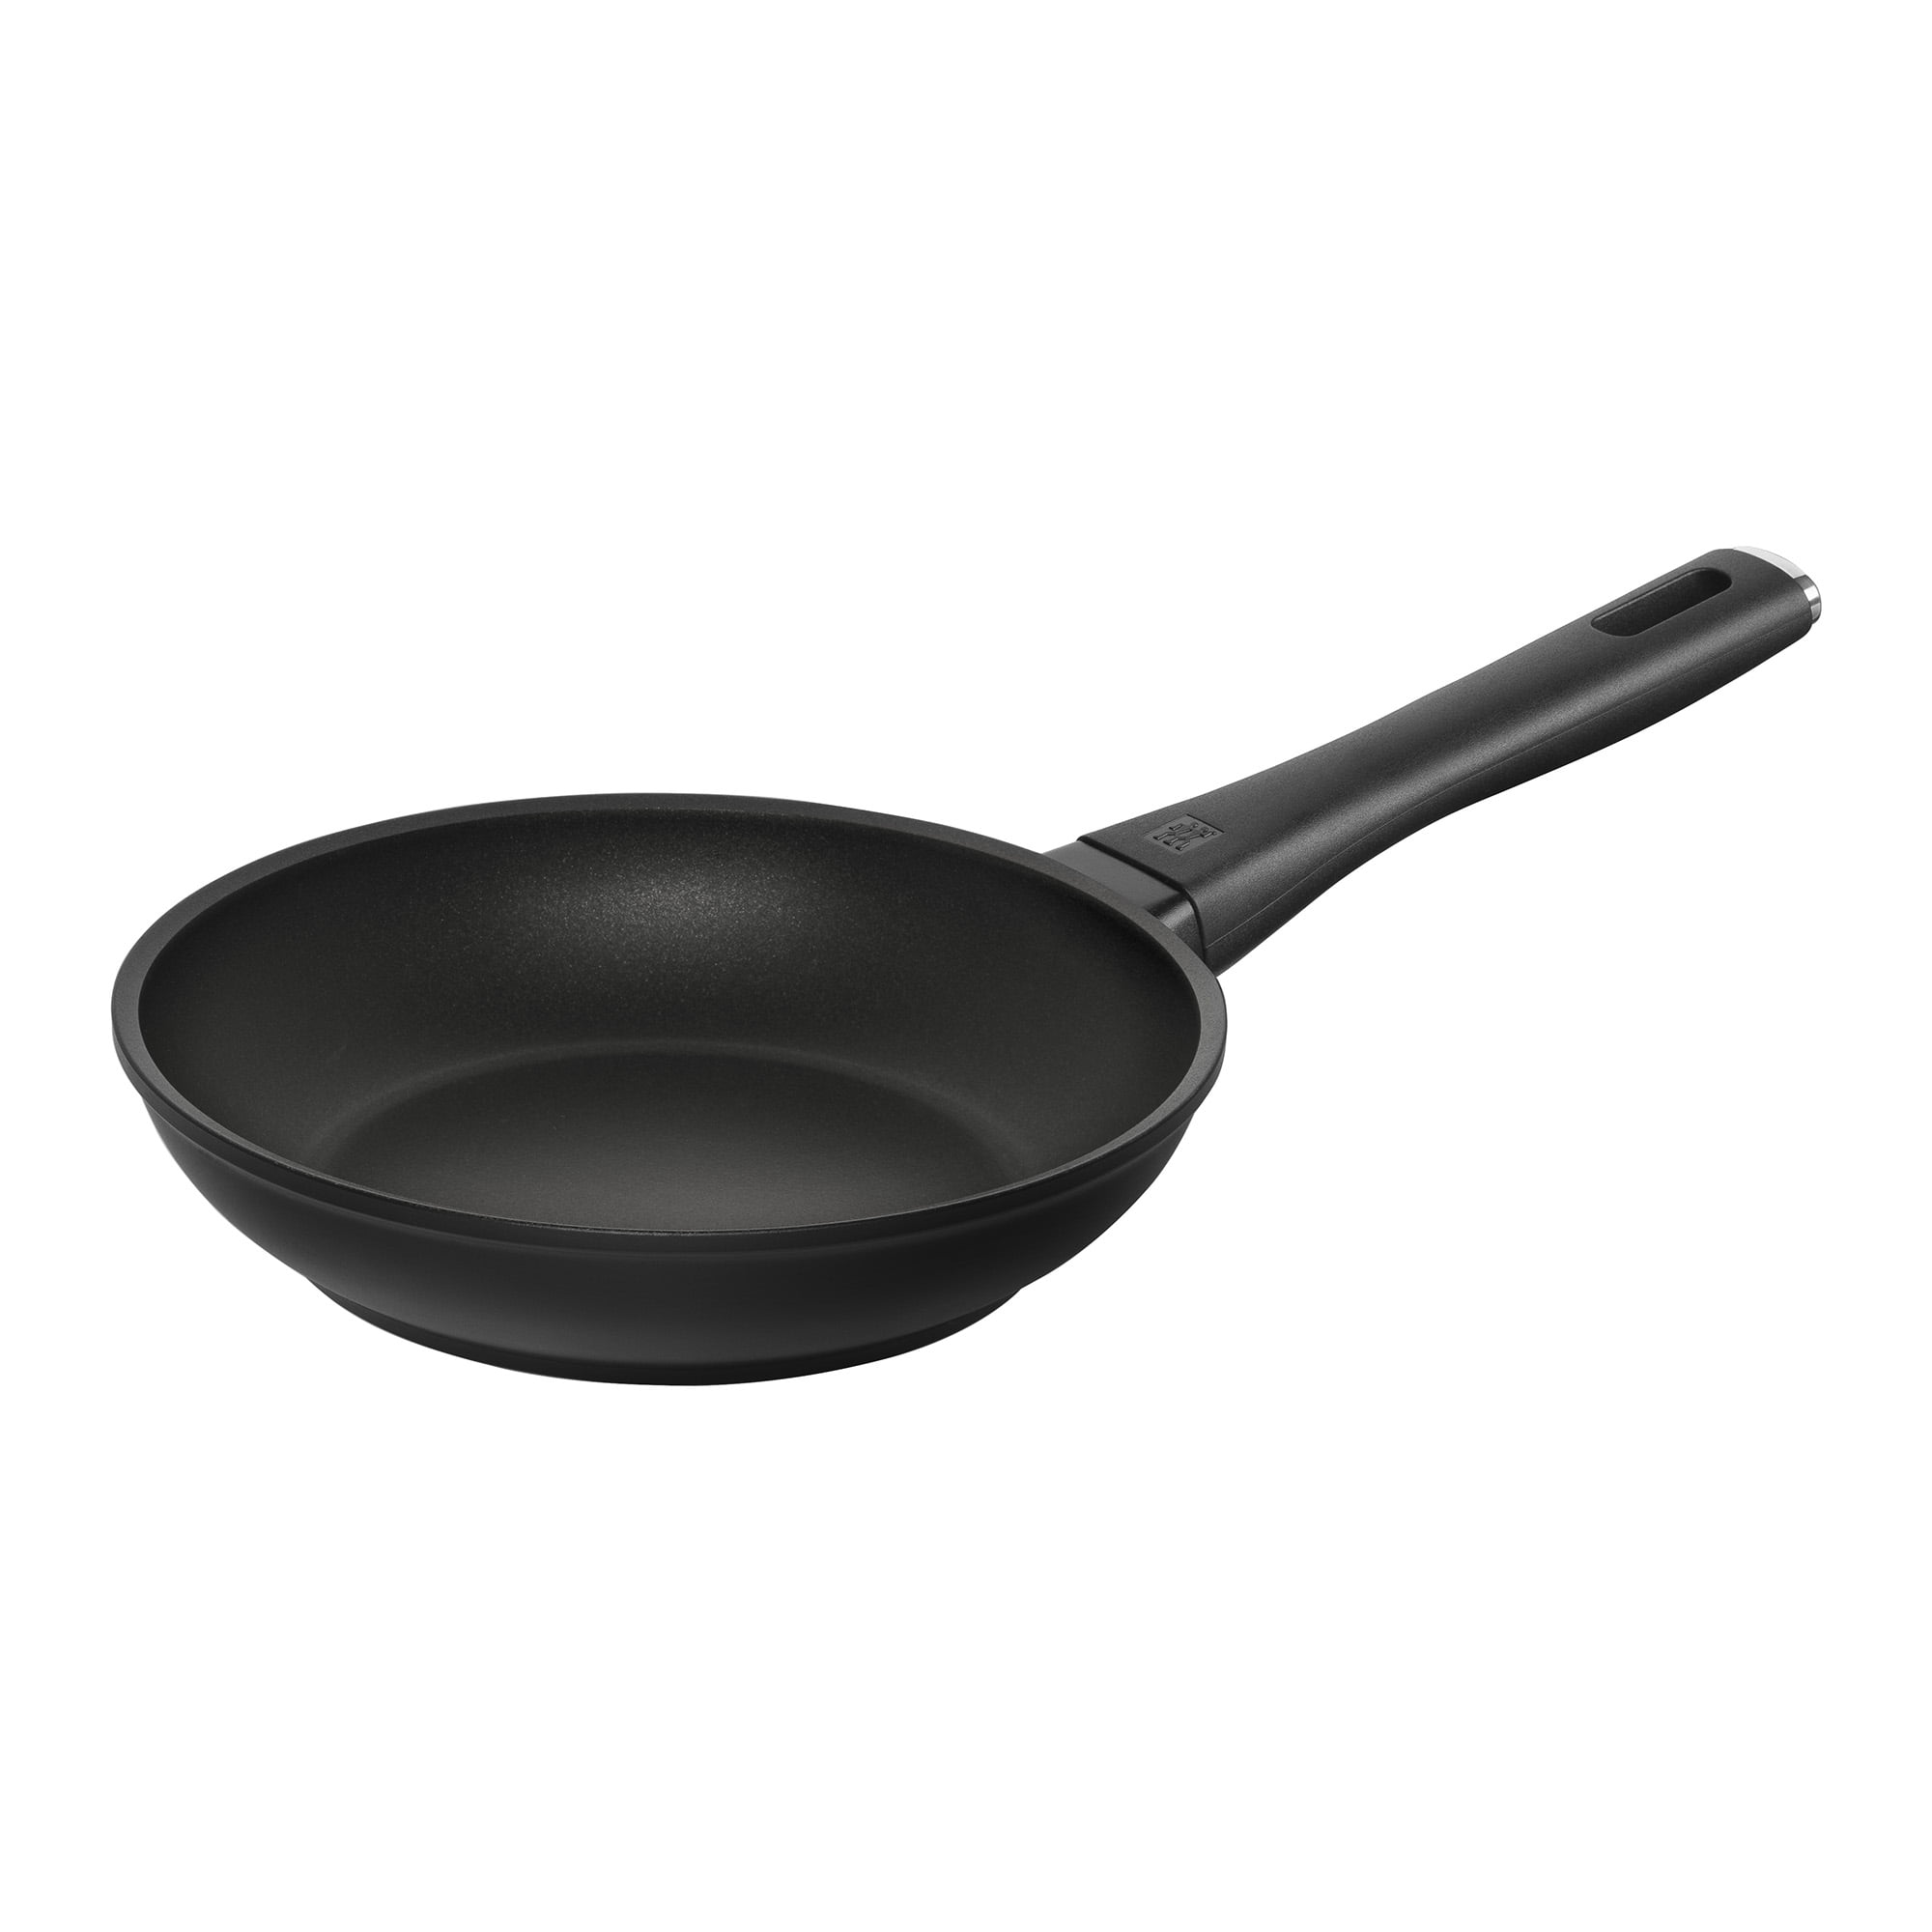 Details about   Advanced Hard Anodized Nonstick Frying Pan/ Fry Pan/Hard Anodized Skillet 8.5" 